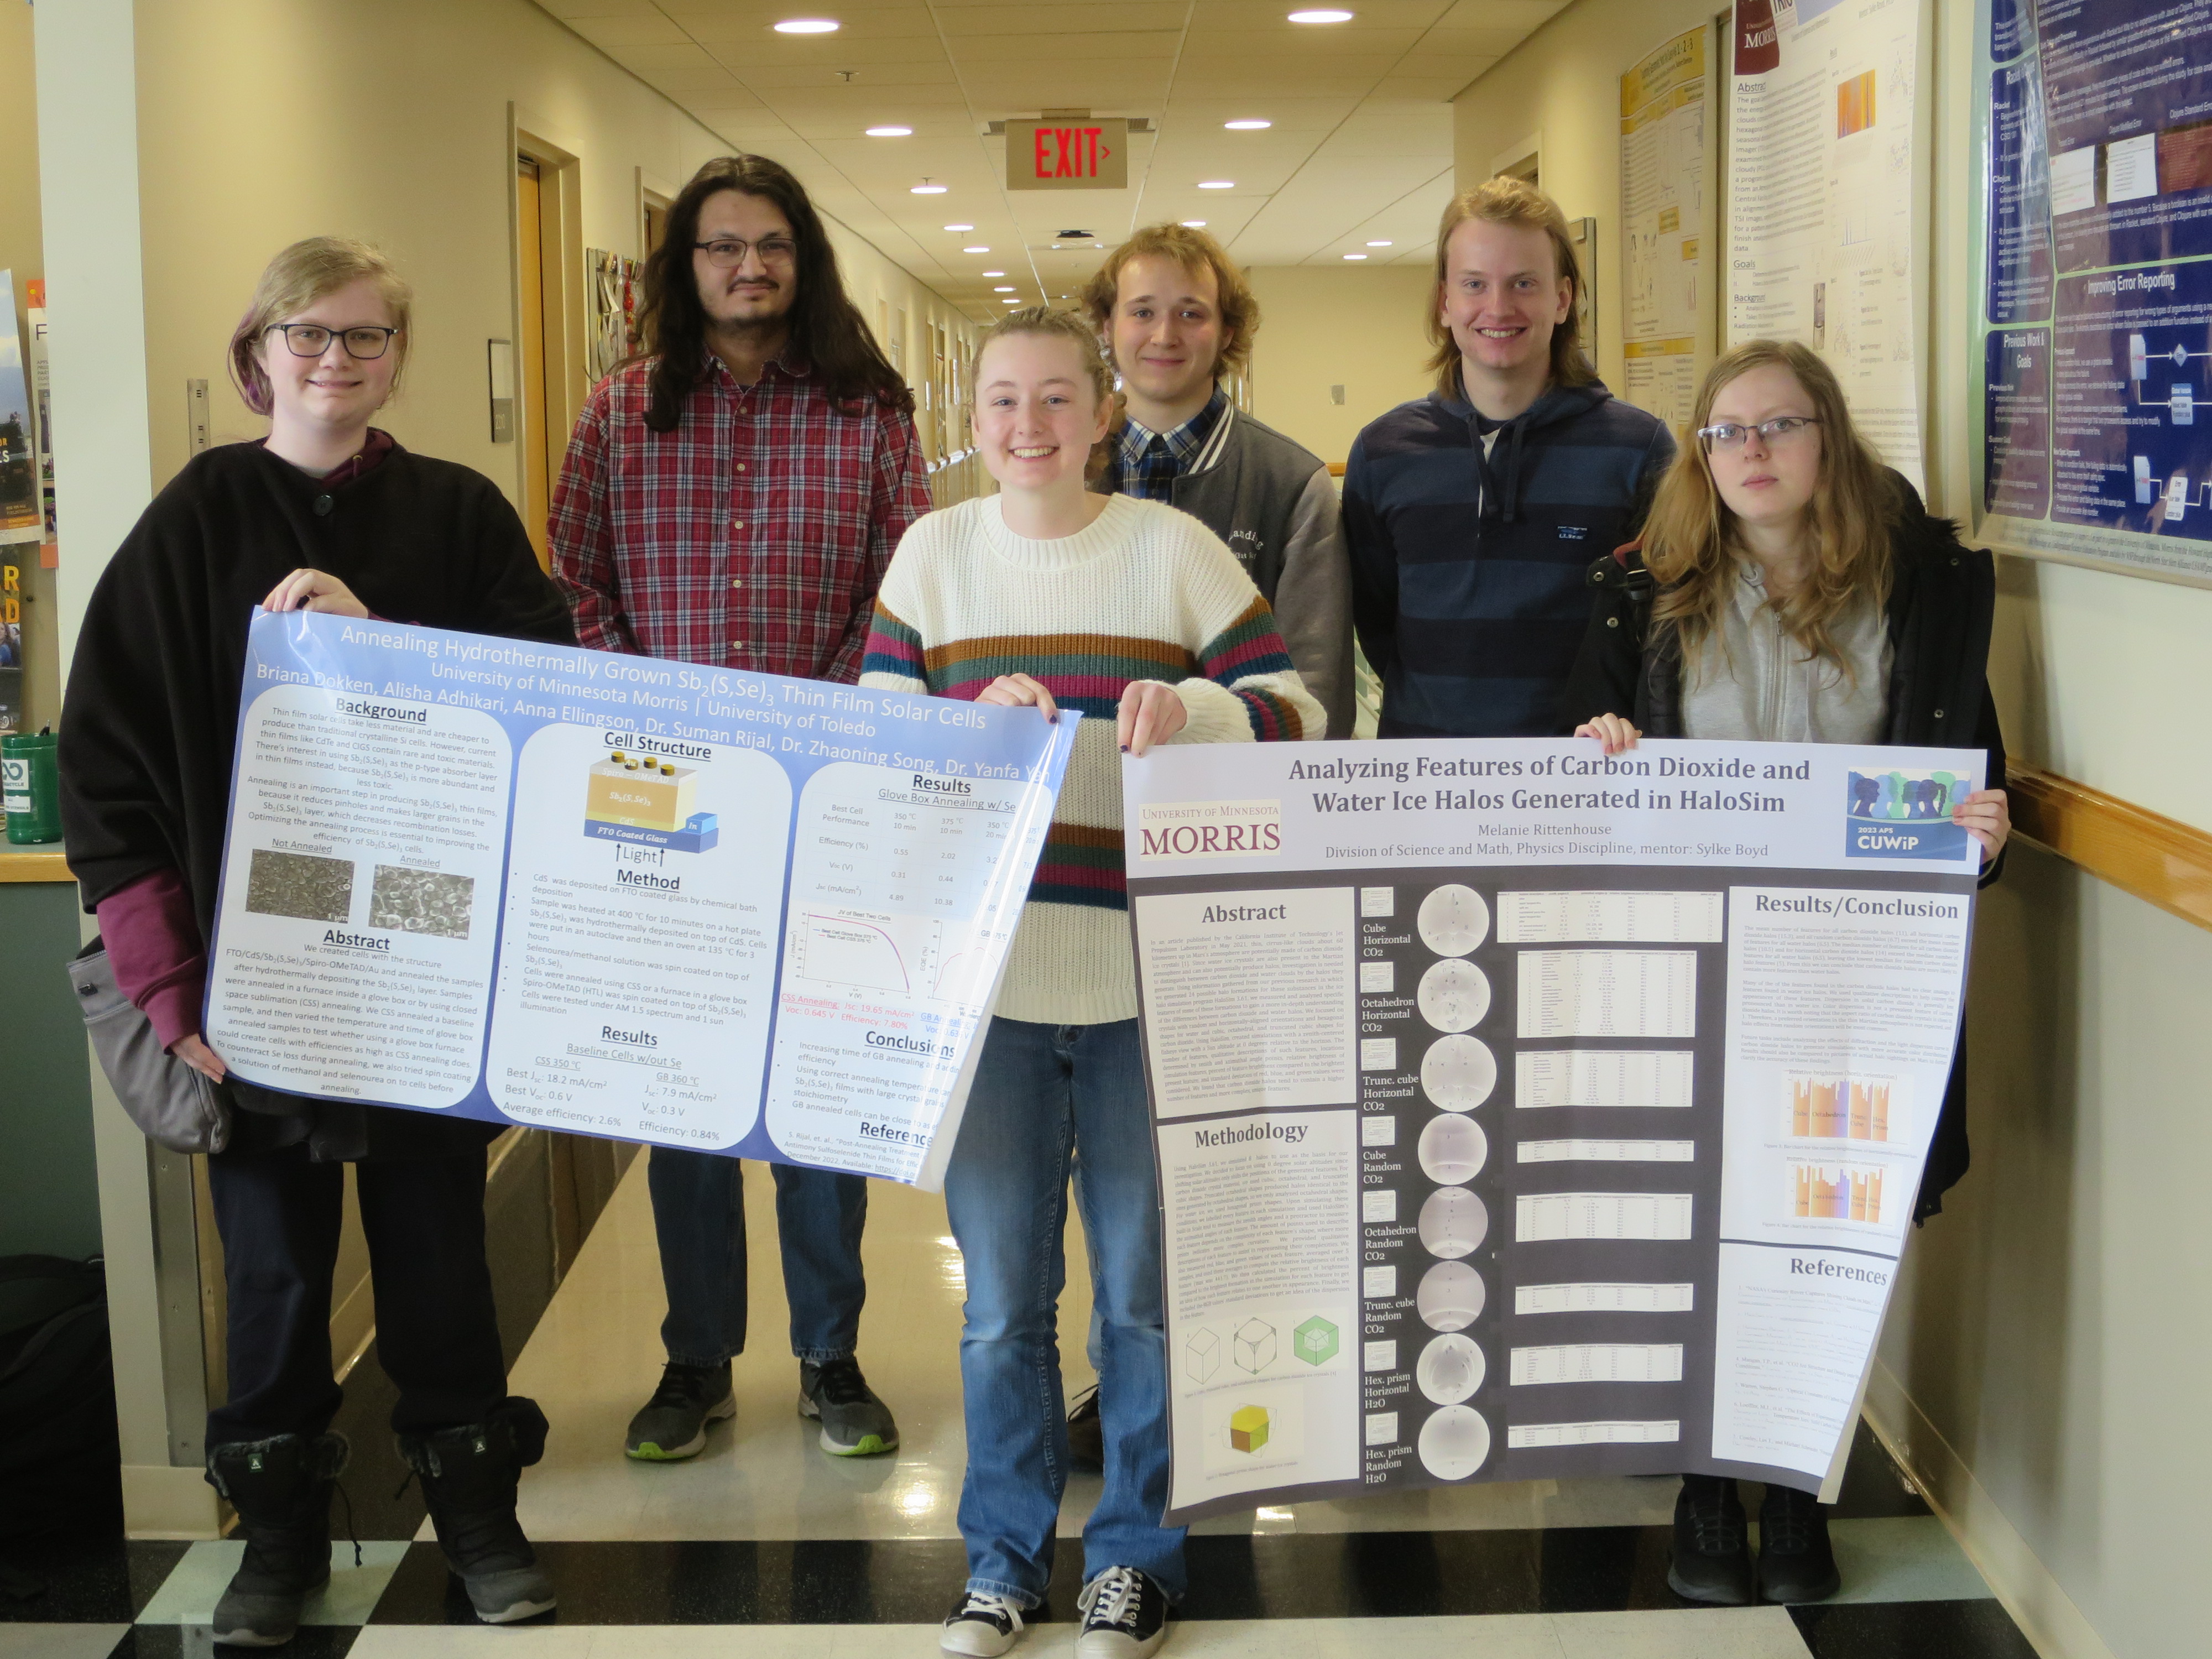 Six people standing in a hallway, holding two scientific posters